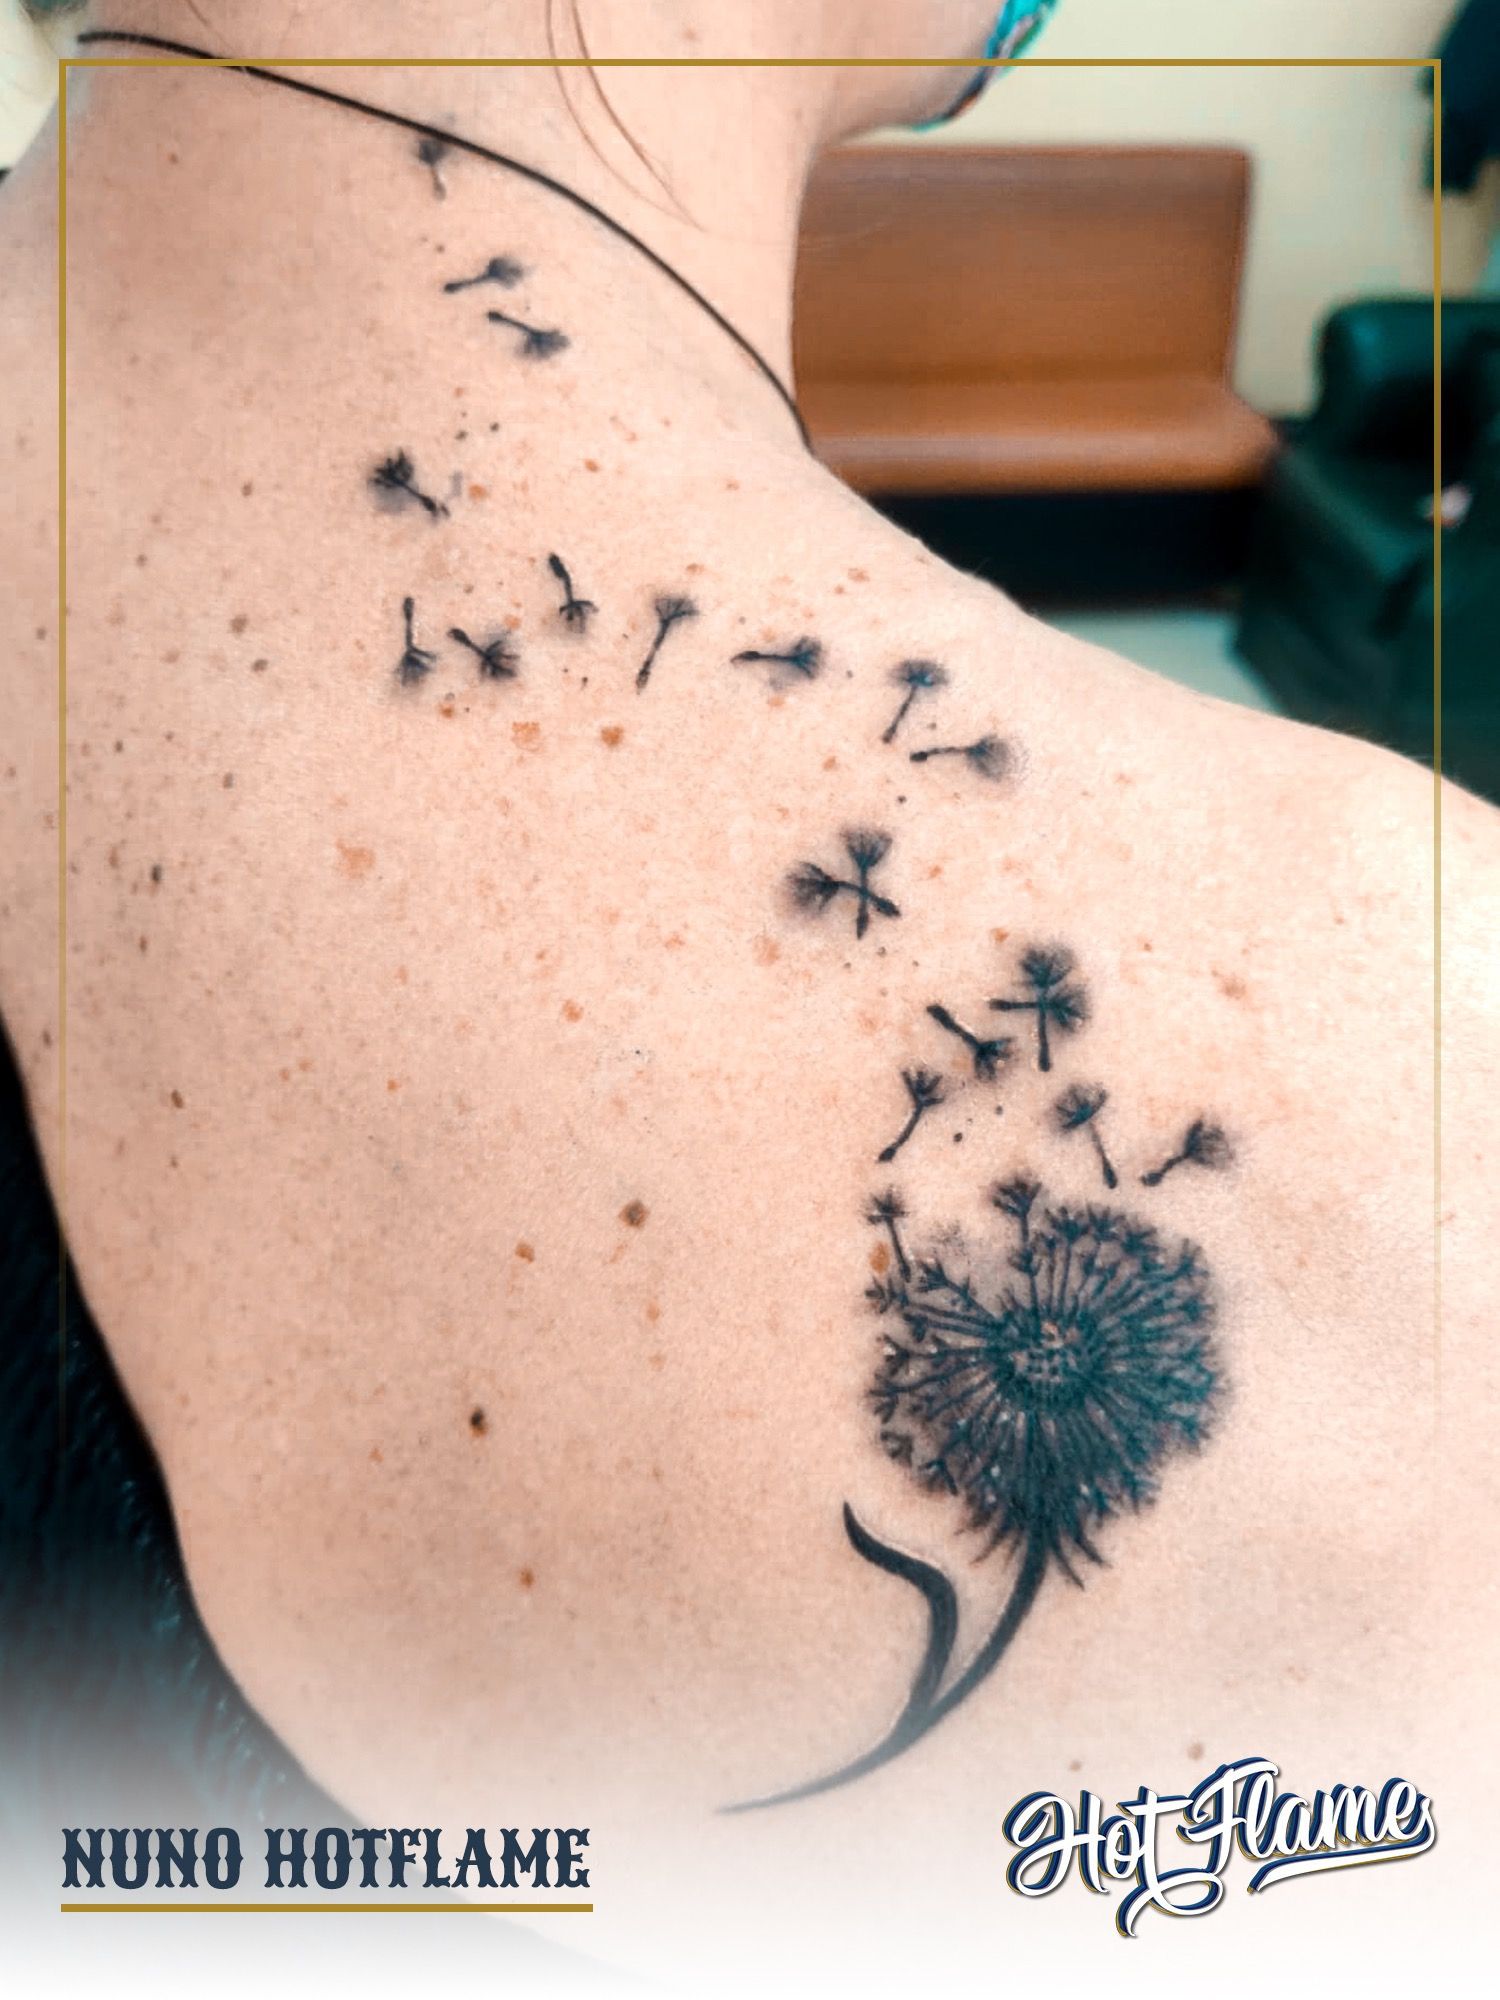 Little dandelion tattoo done on the ankle, fine line